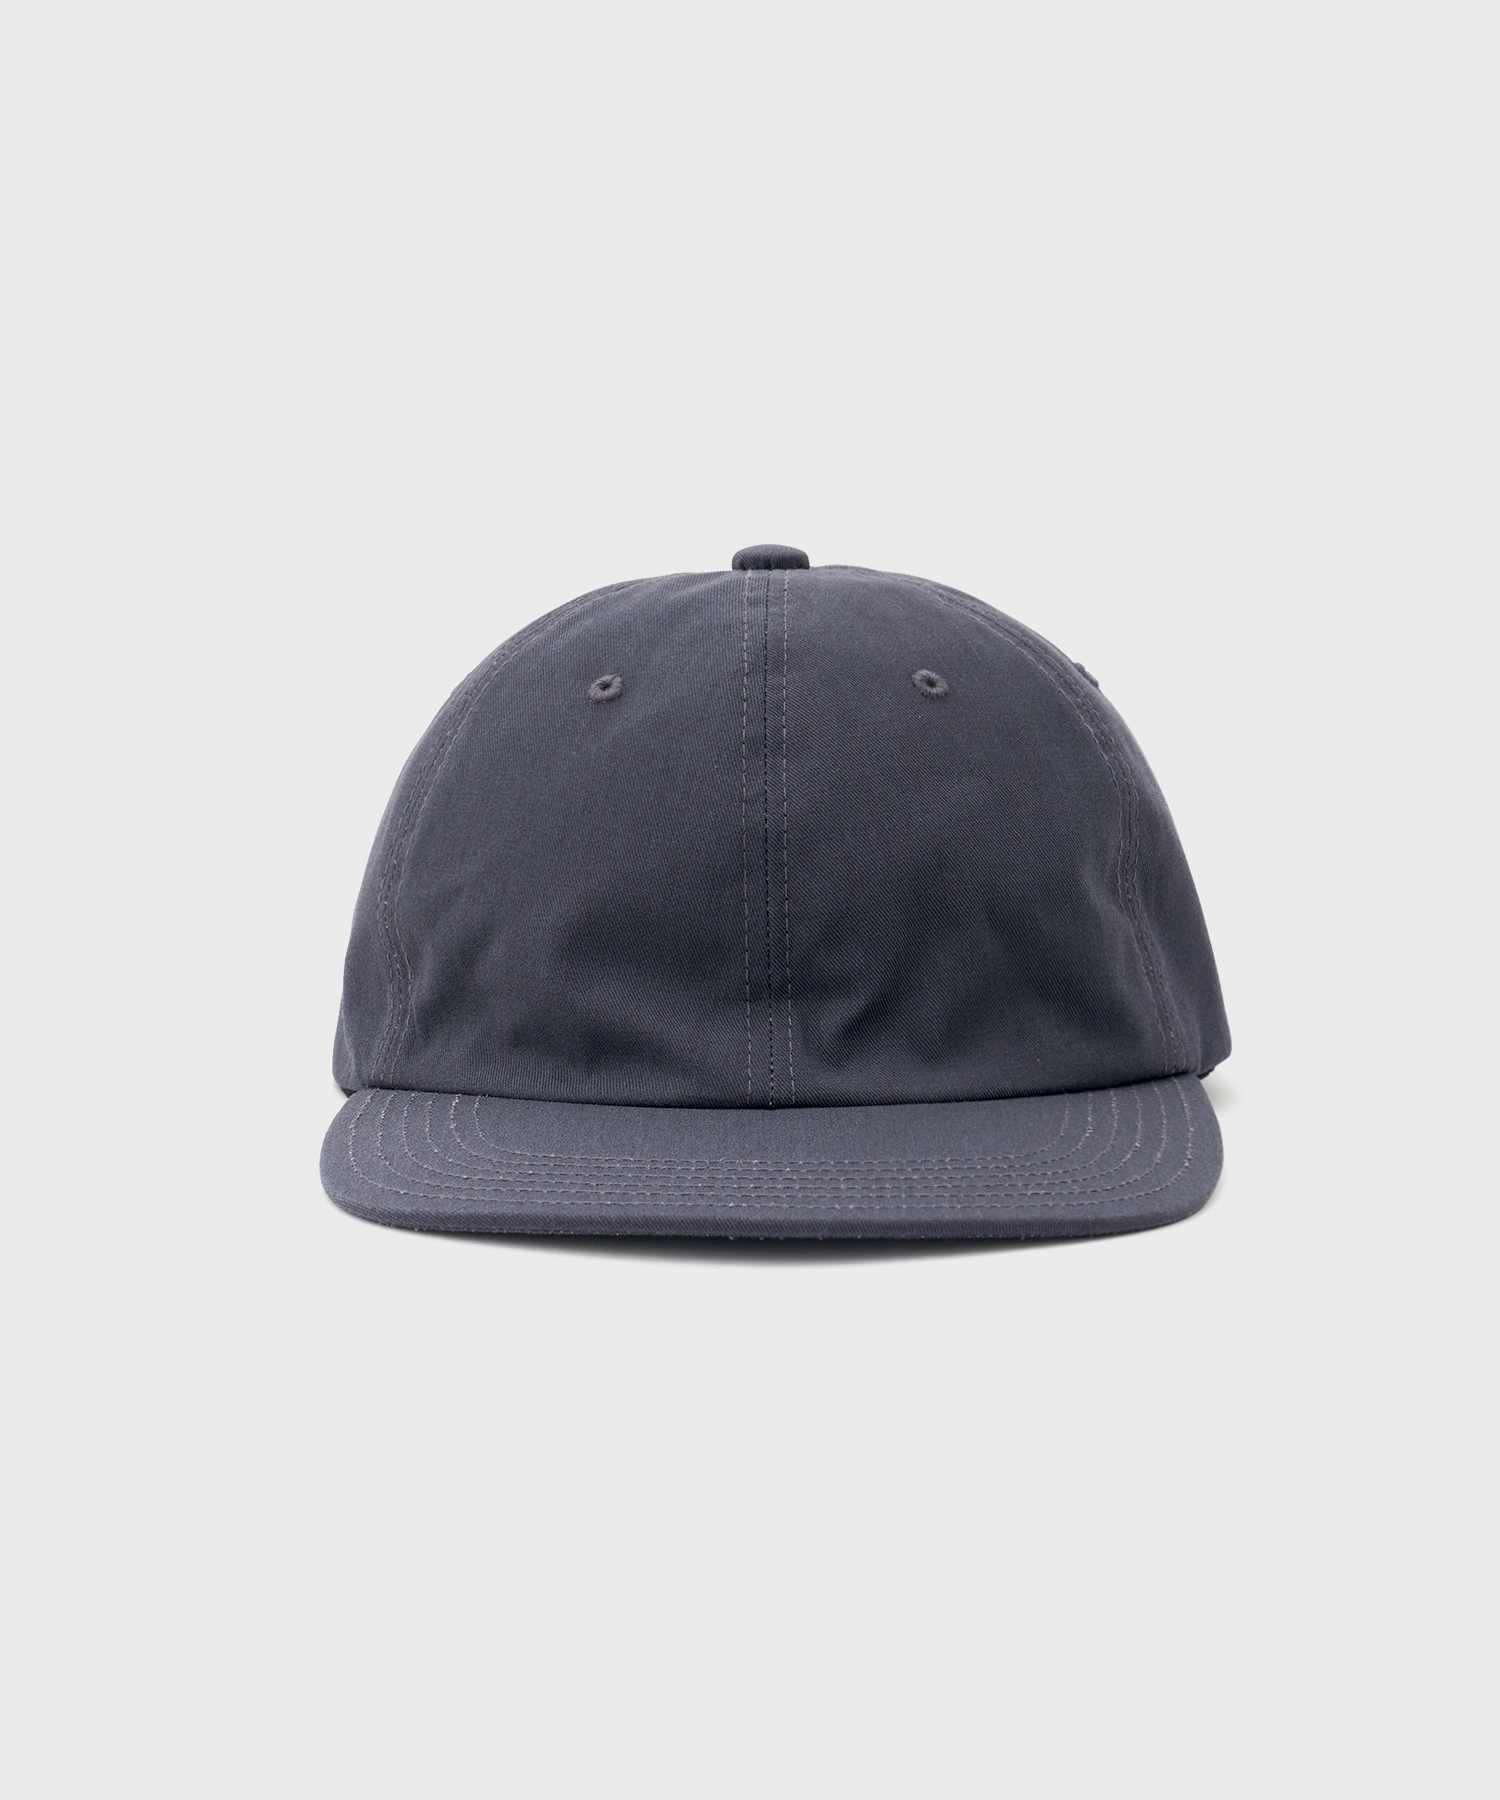 Organic Cotton / Recycle Polyester Twill Cap (Navy)